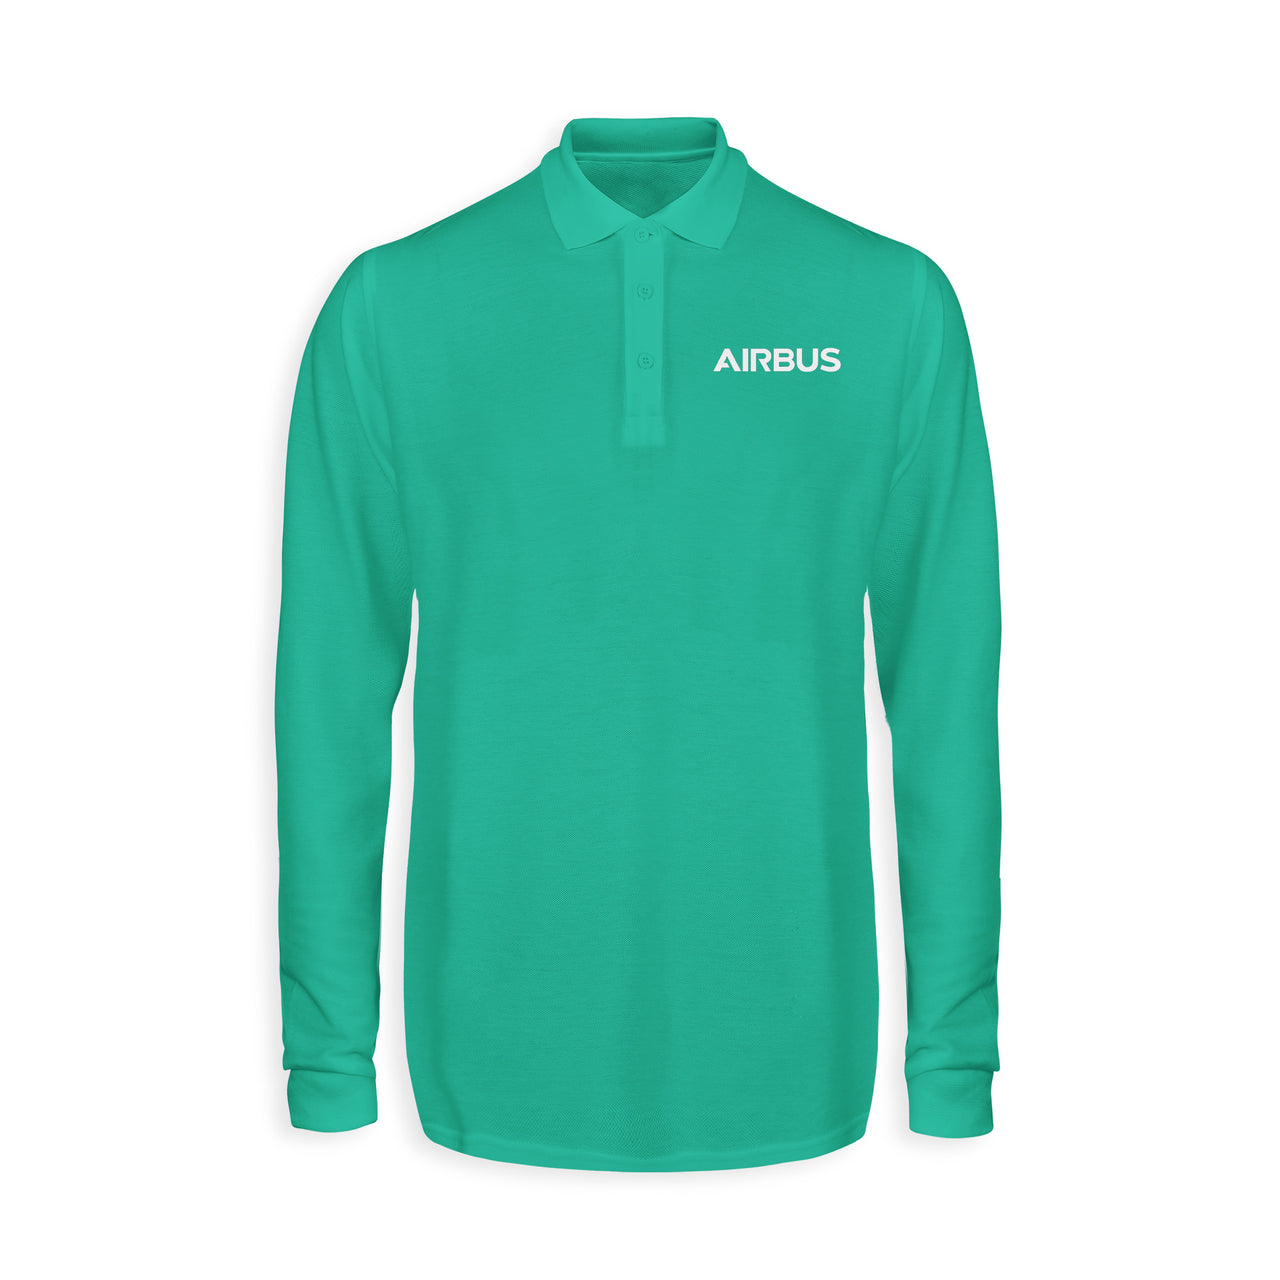 Airbus & Text Designed Long Sleeve Polo T-Shirts